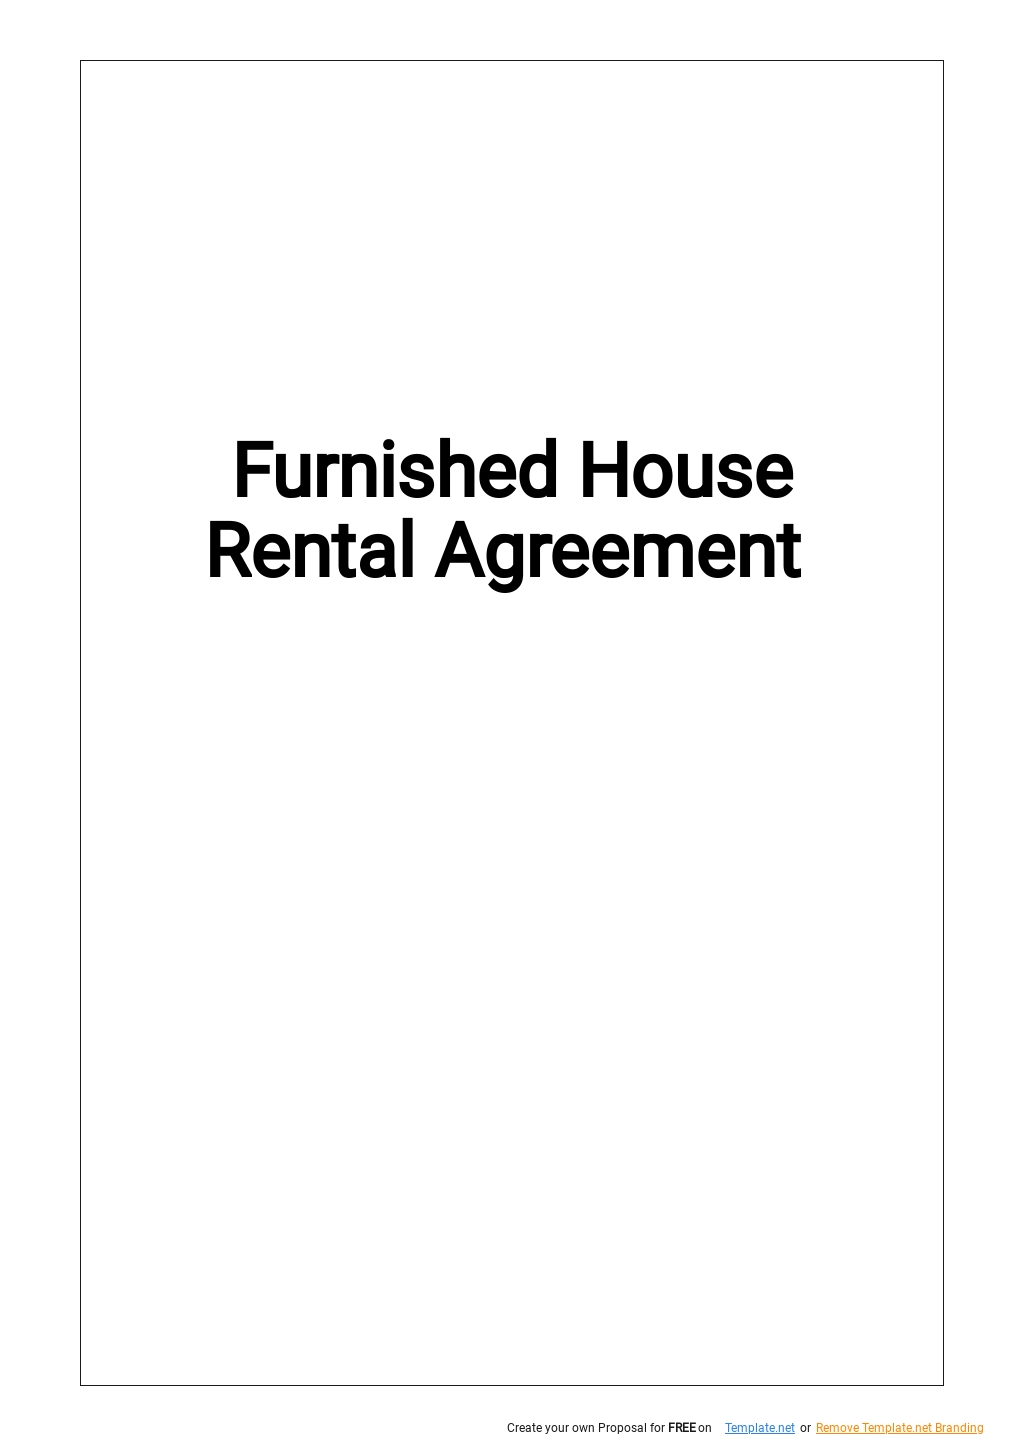 house-rental-agreement-template-google-docs-word-apple-pages